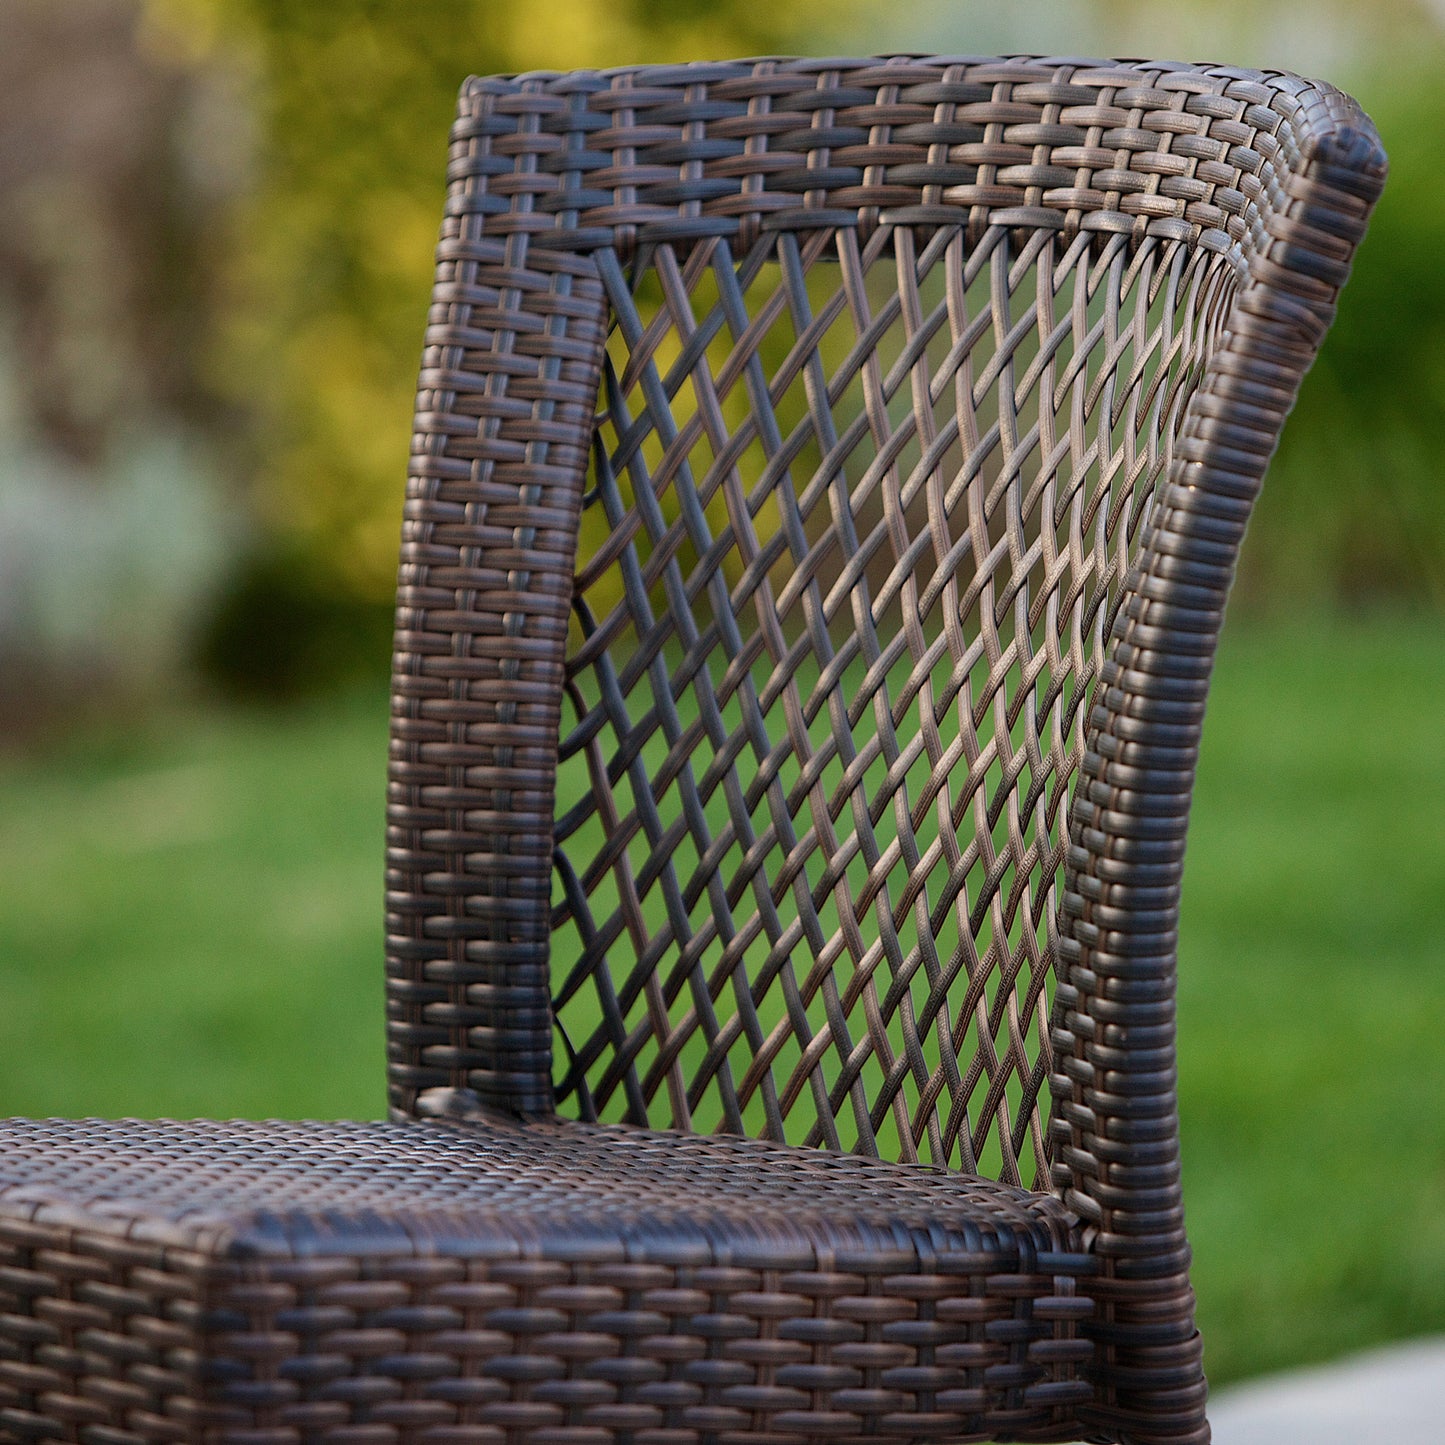 Capella Outdoor 3 Piece Multi-brown Wicker Stacking Chair Chat Set